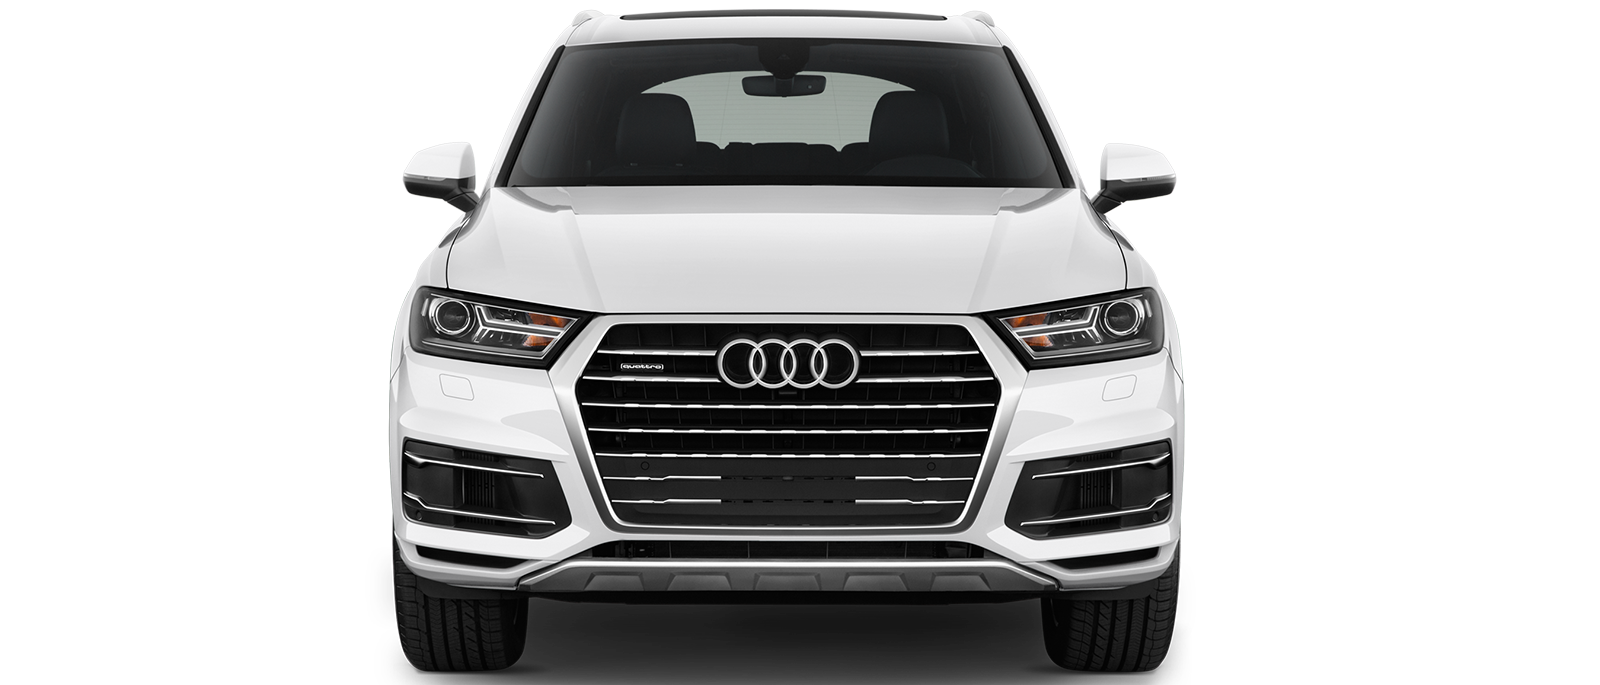 Wit Audi SUV PNG Transparant Beeld